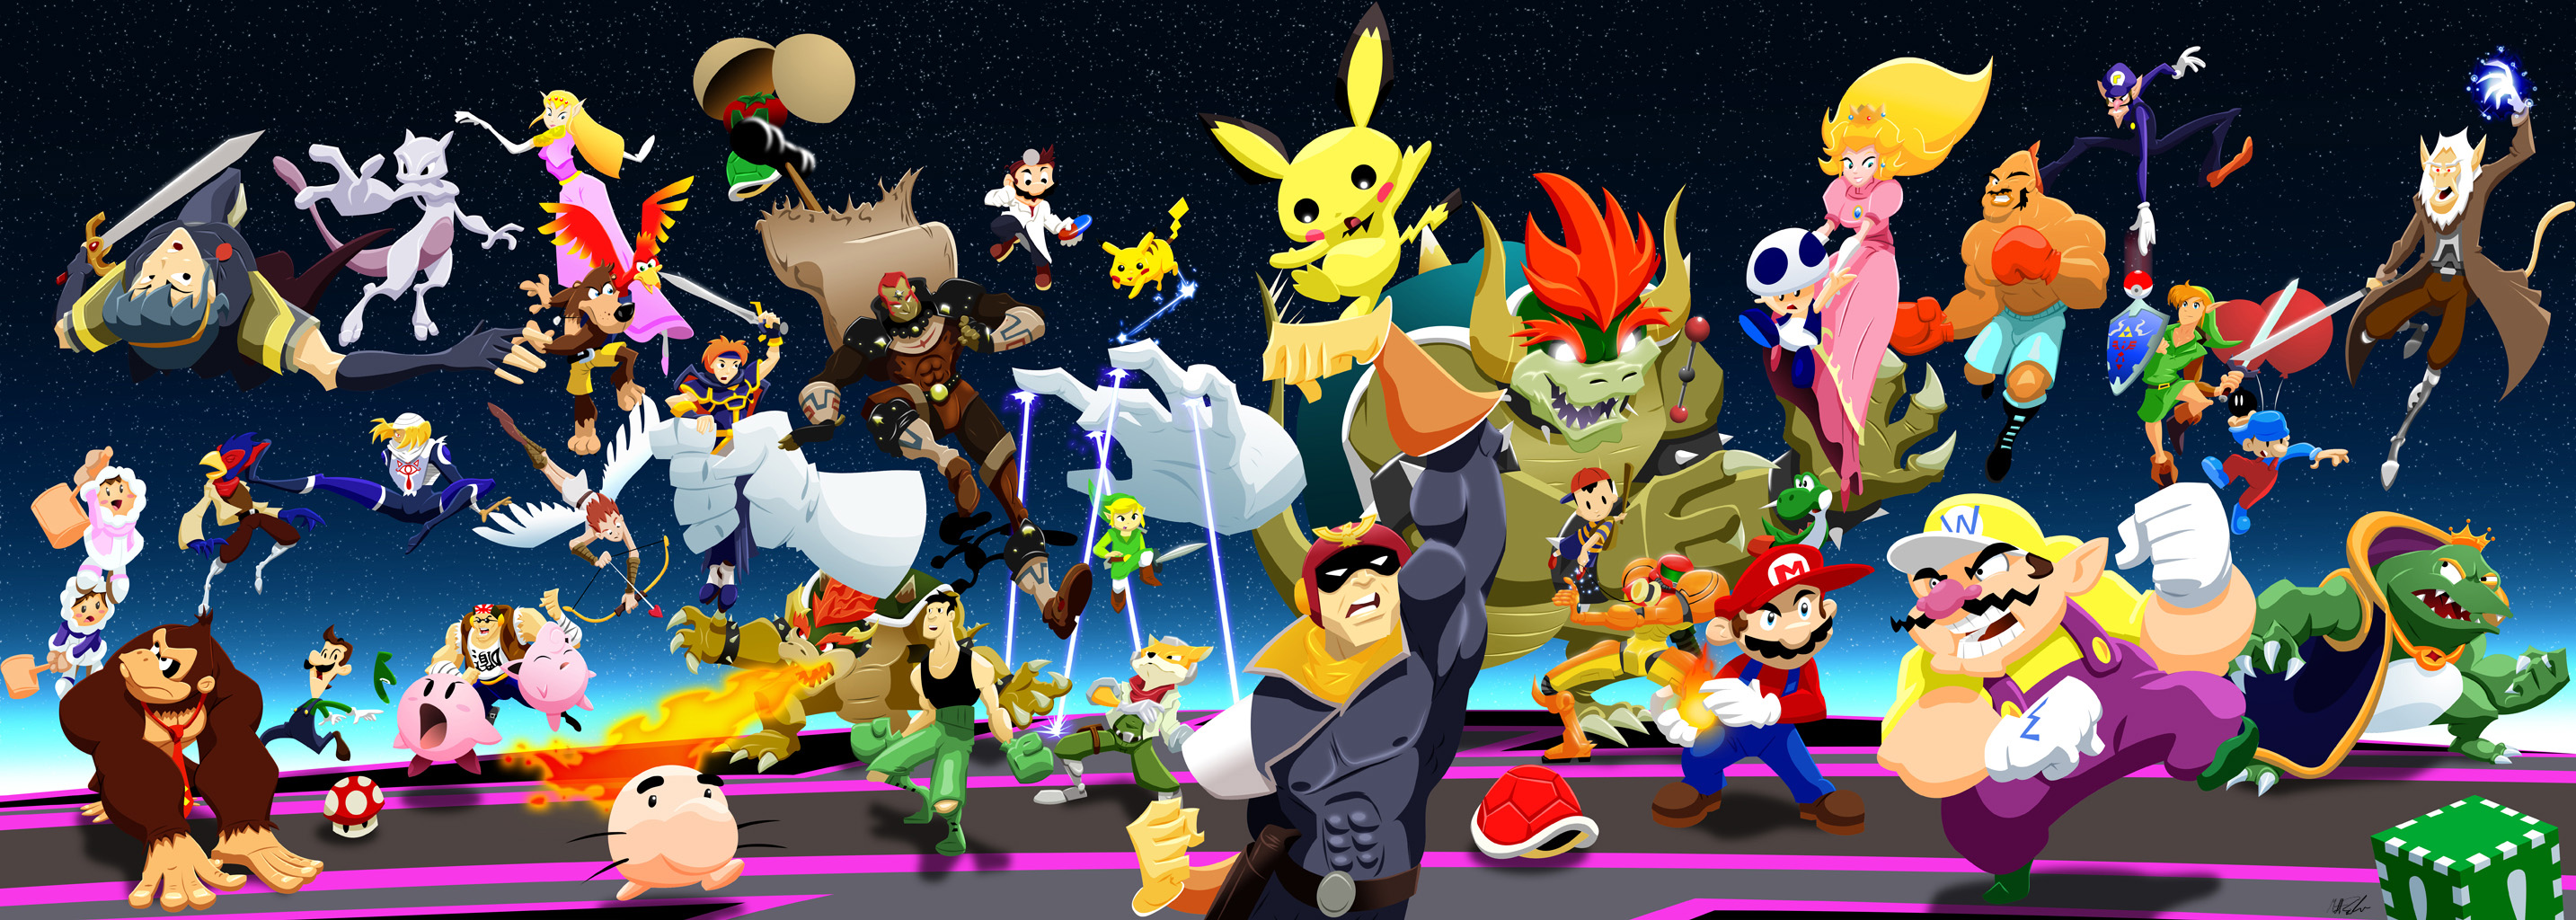 Existing Characters In Smash Bros Wii U And Nintendo 3DS Will Have Lots Of  New Moves - My Nintendo News